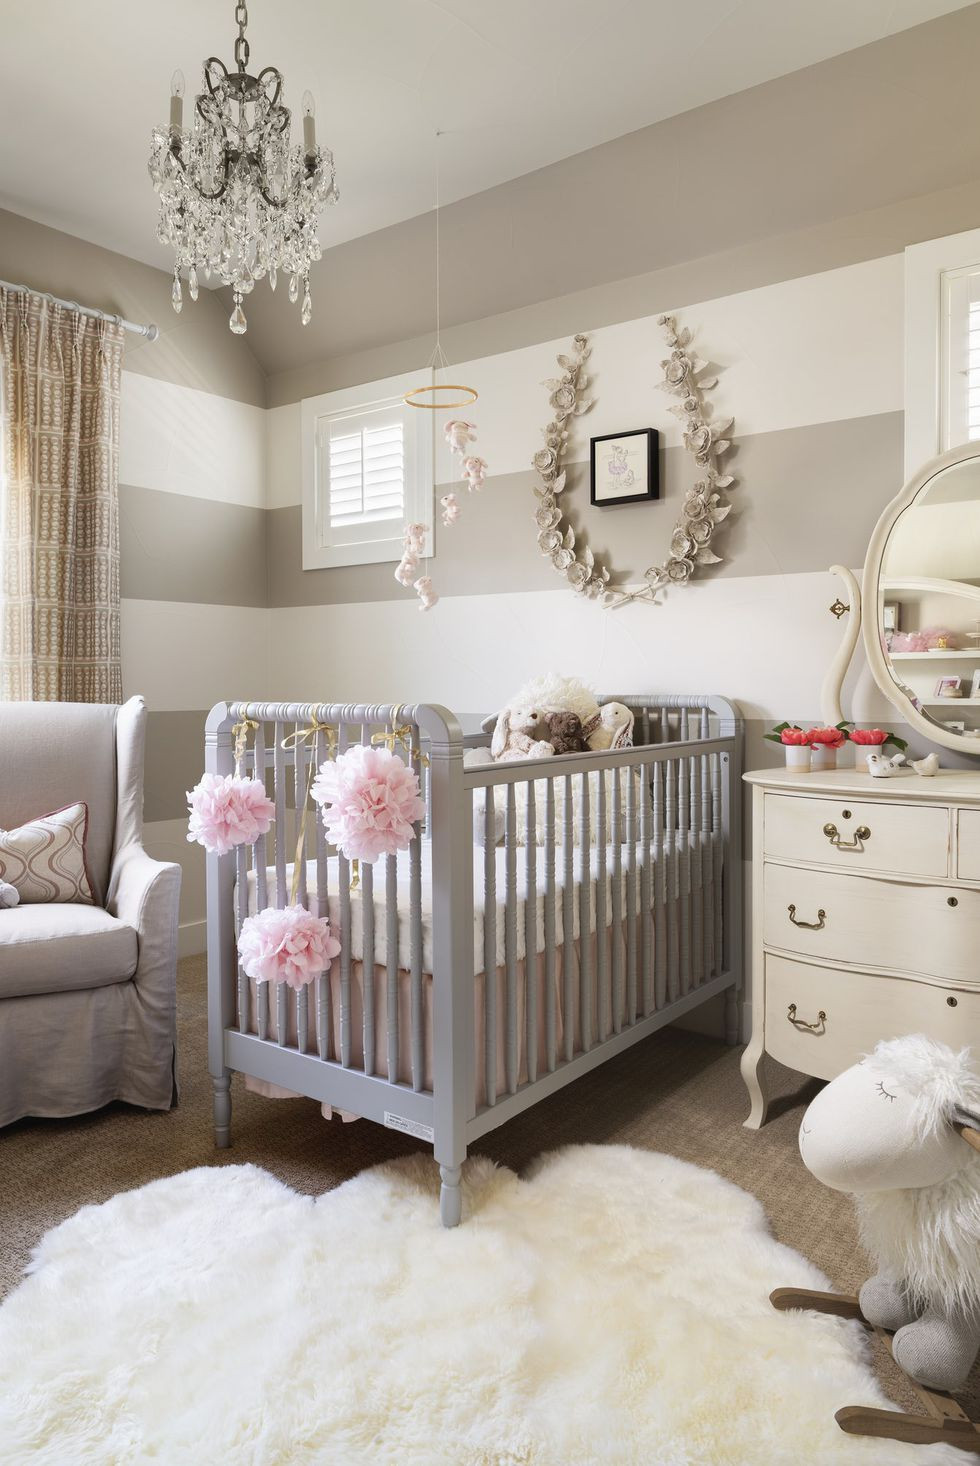 Do It Yourself Baby Nursery Decor
 Stylish Baby Rooms Even Adults Would Adore